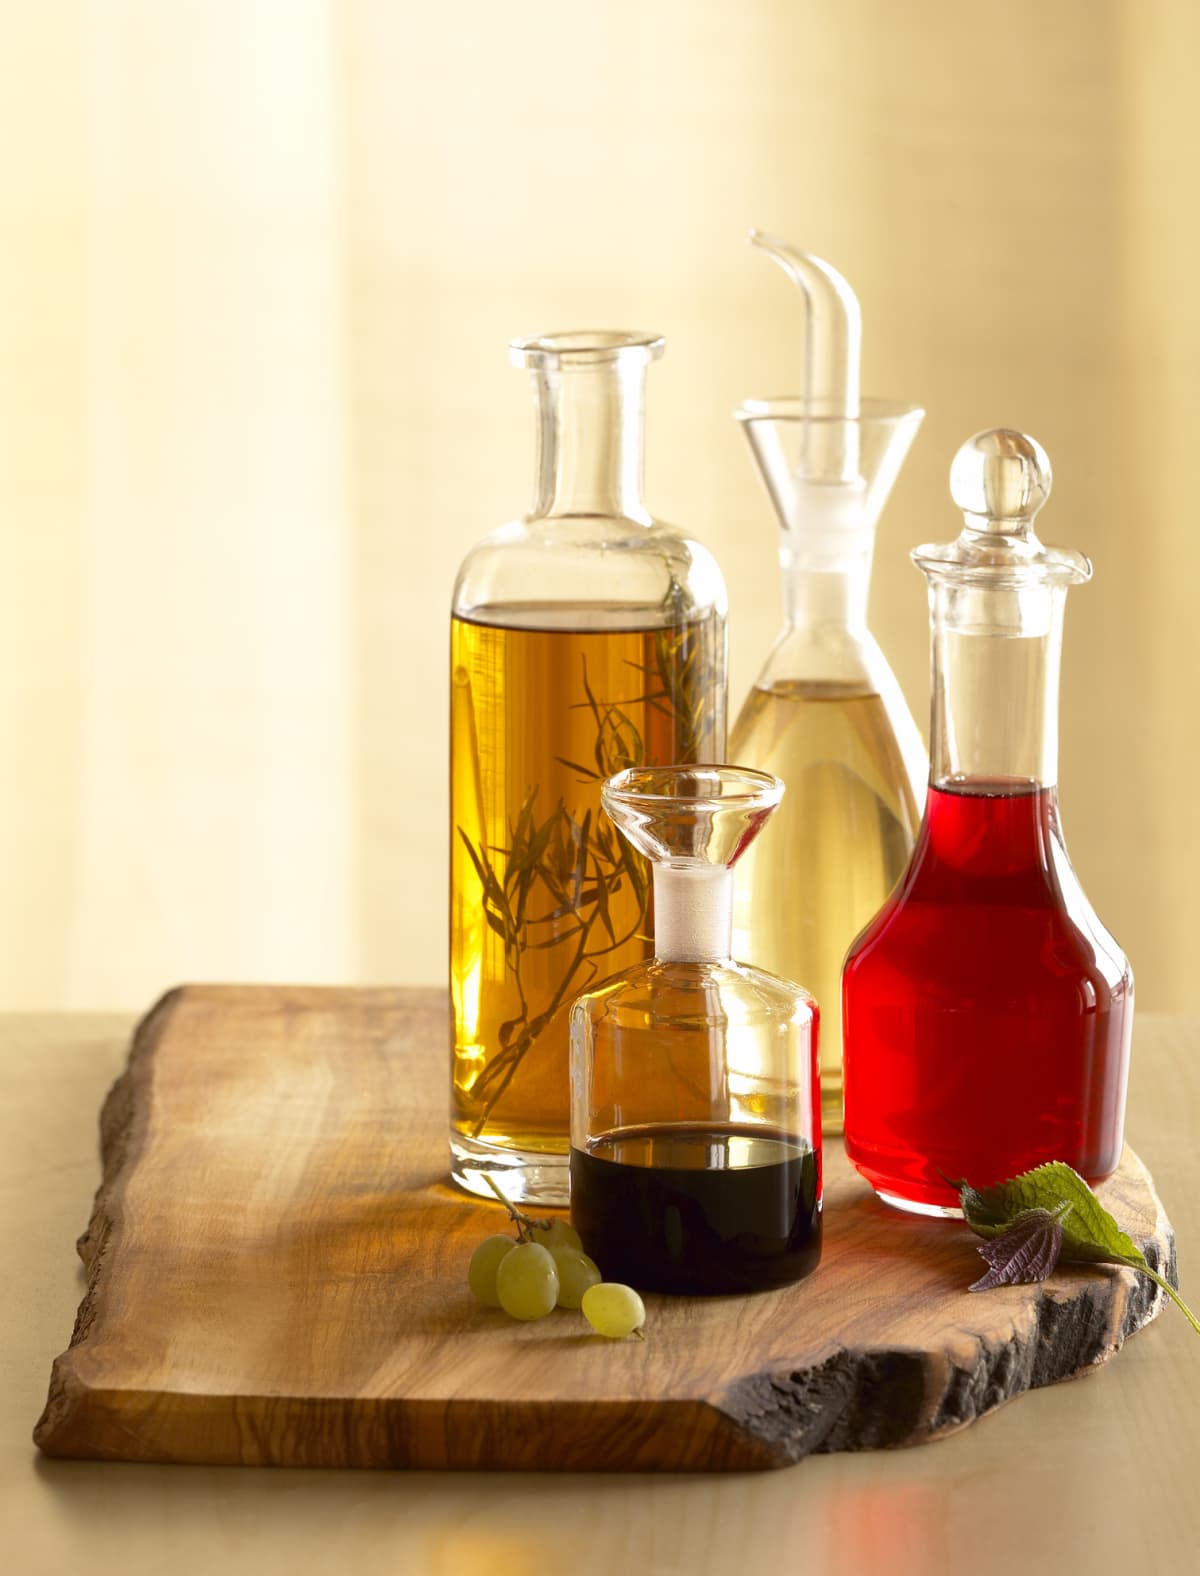 Assorted vinegars on a wooden board